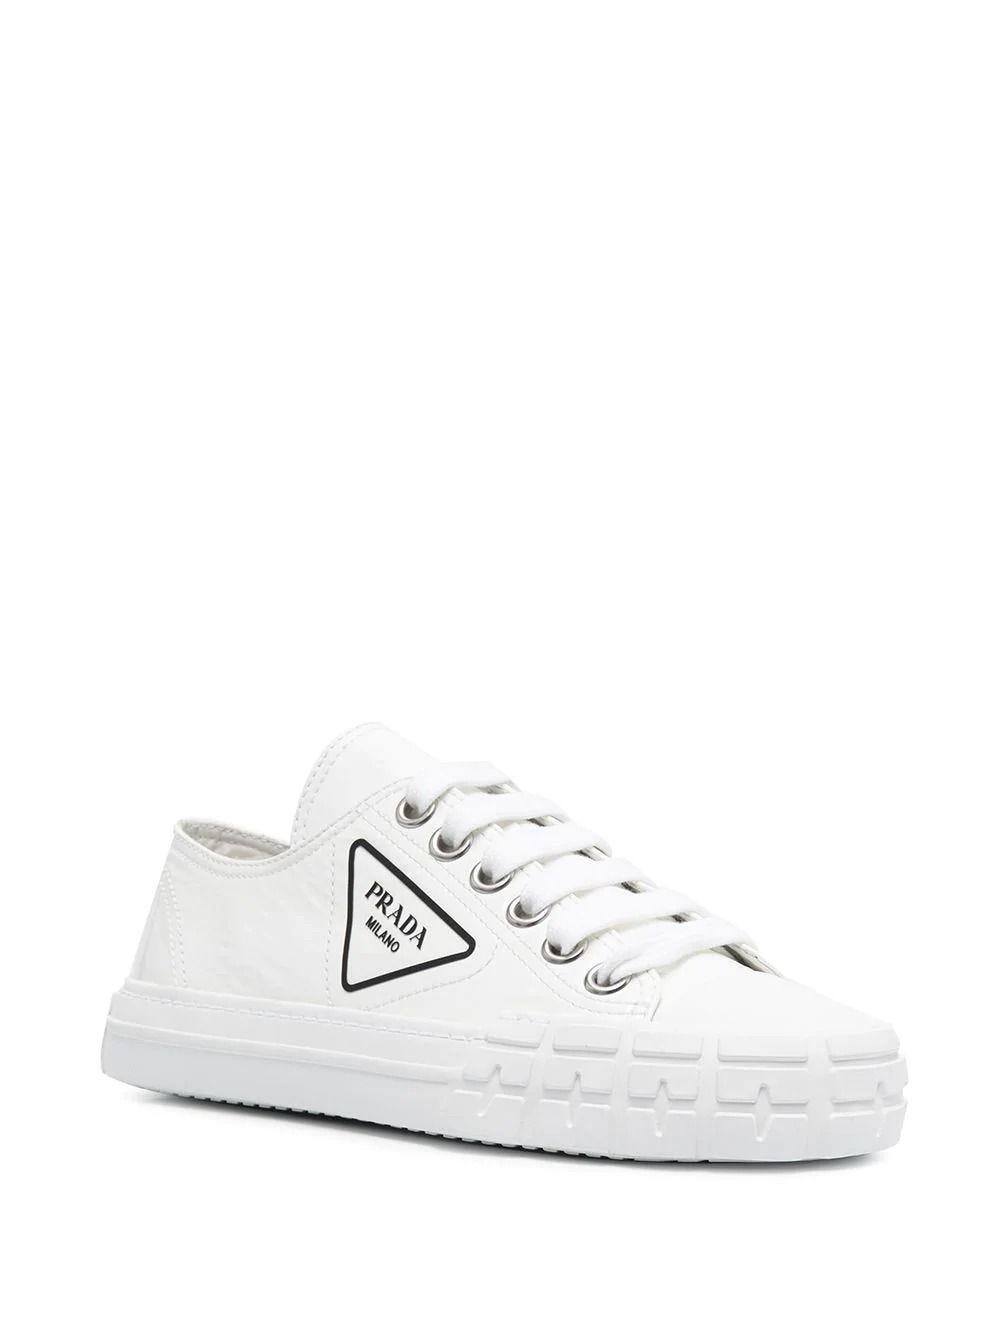 Insecten tellen gastvrouw Keizer Prada White Wheel Patent Leather Sneakers With Vulcanized Rubber Sole | Lyst